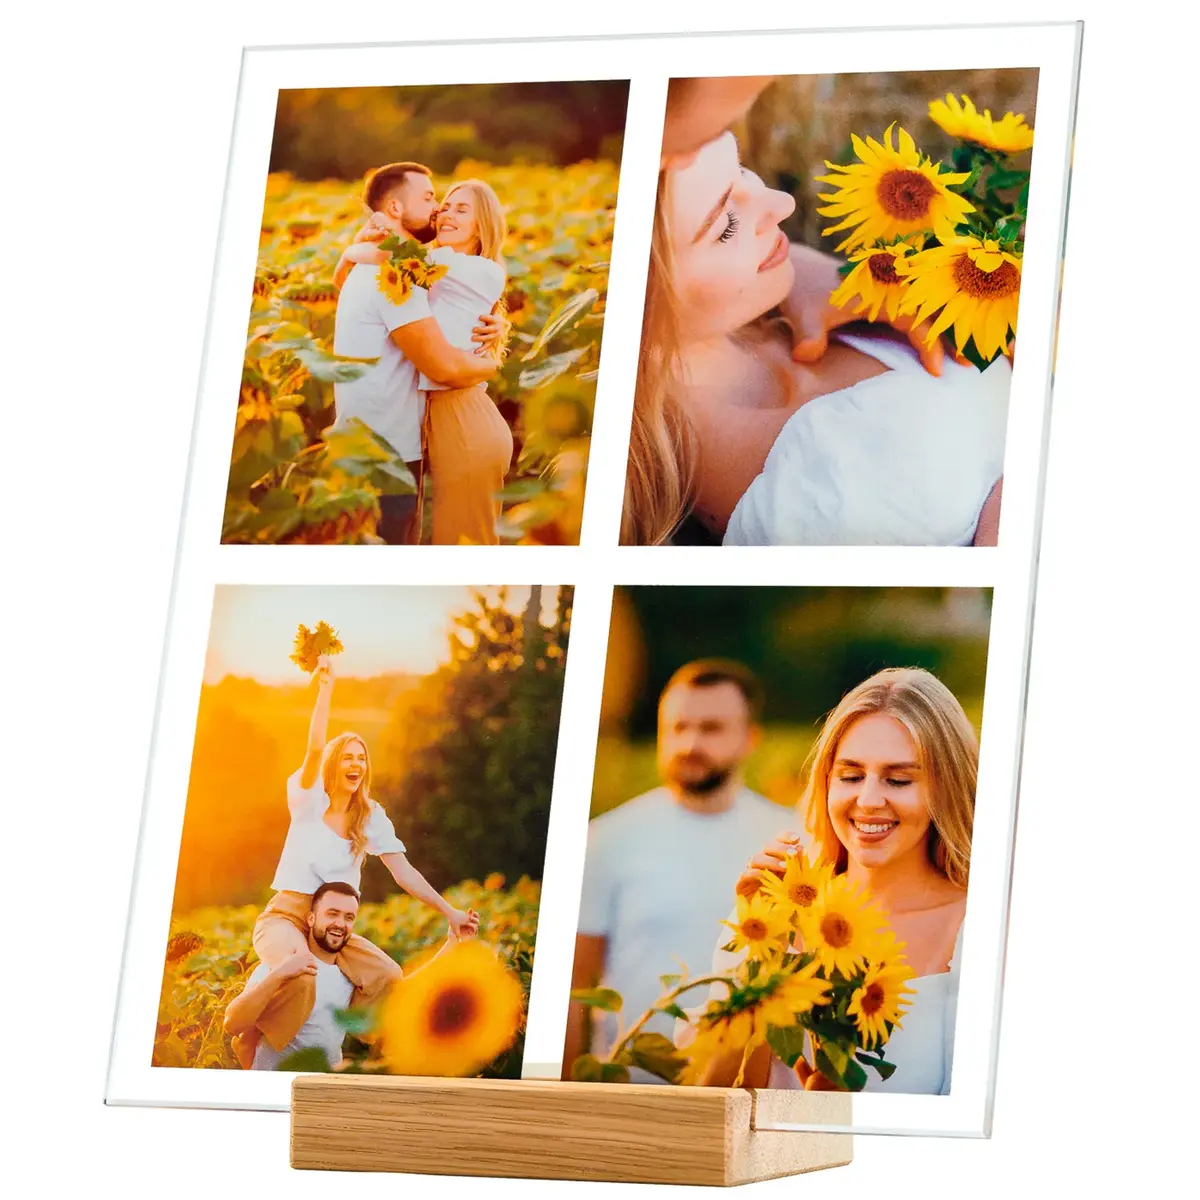 Glass plate template - Photos and Collages editor